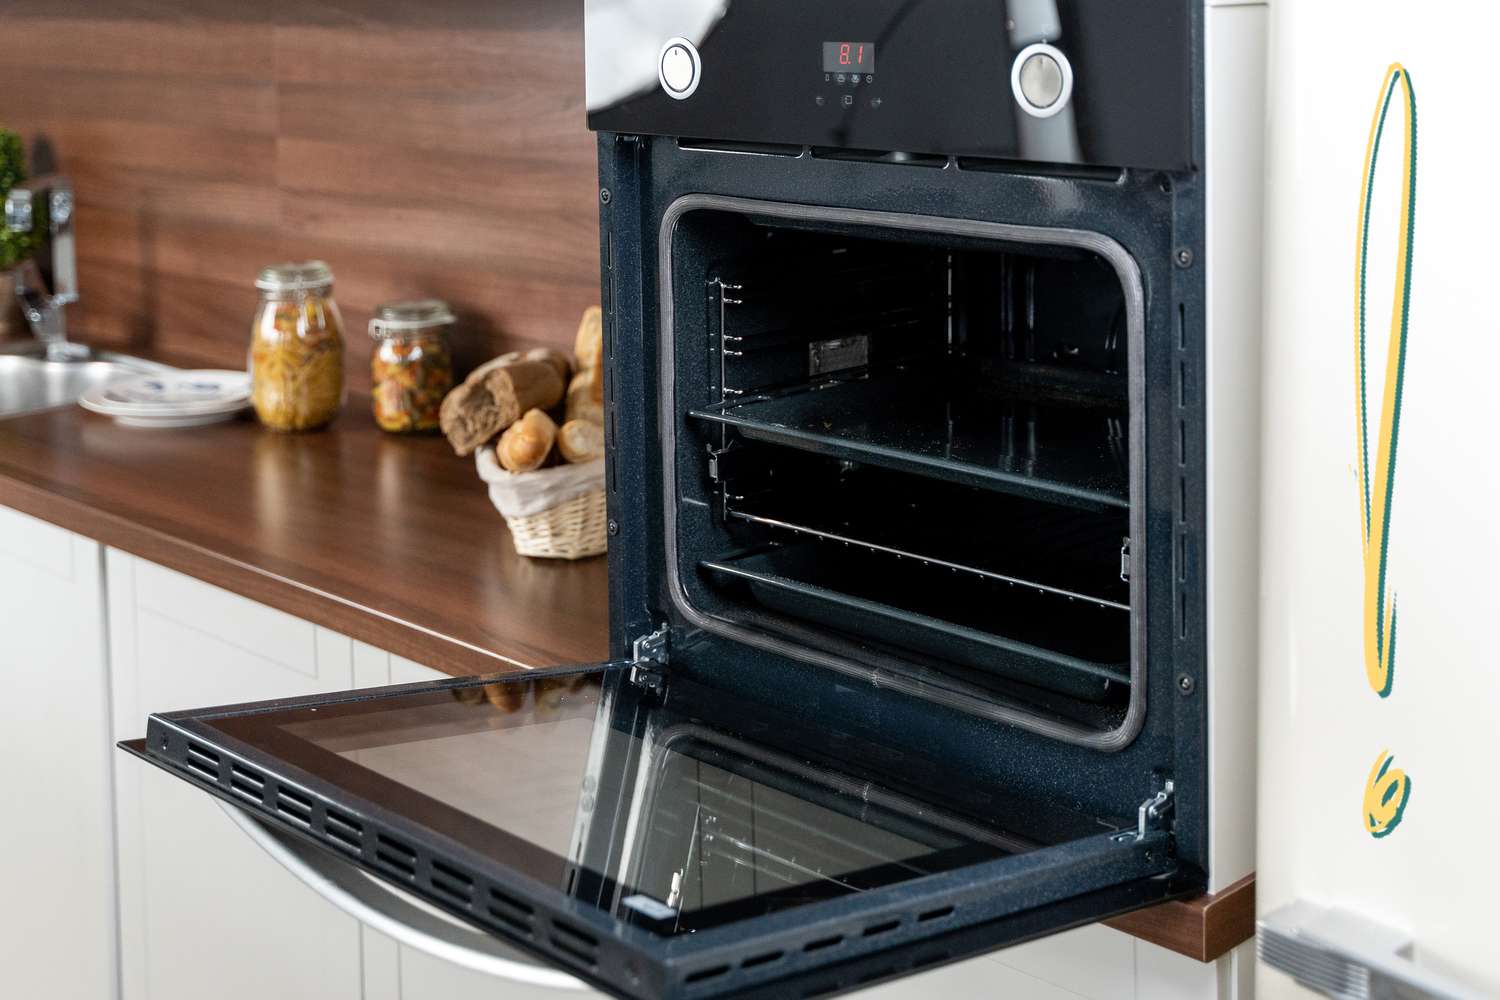 Can Self Cleaning Oven Kill You: Understanding Oven Safety